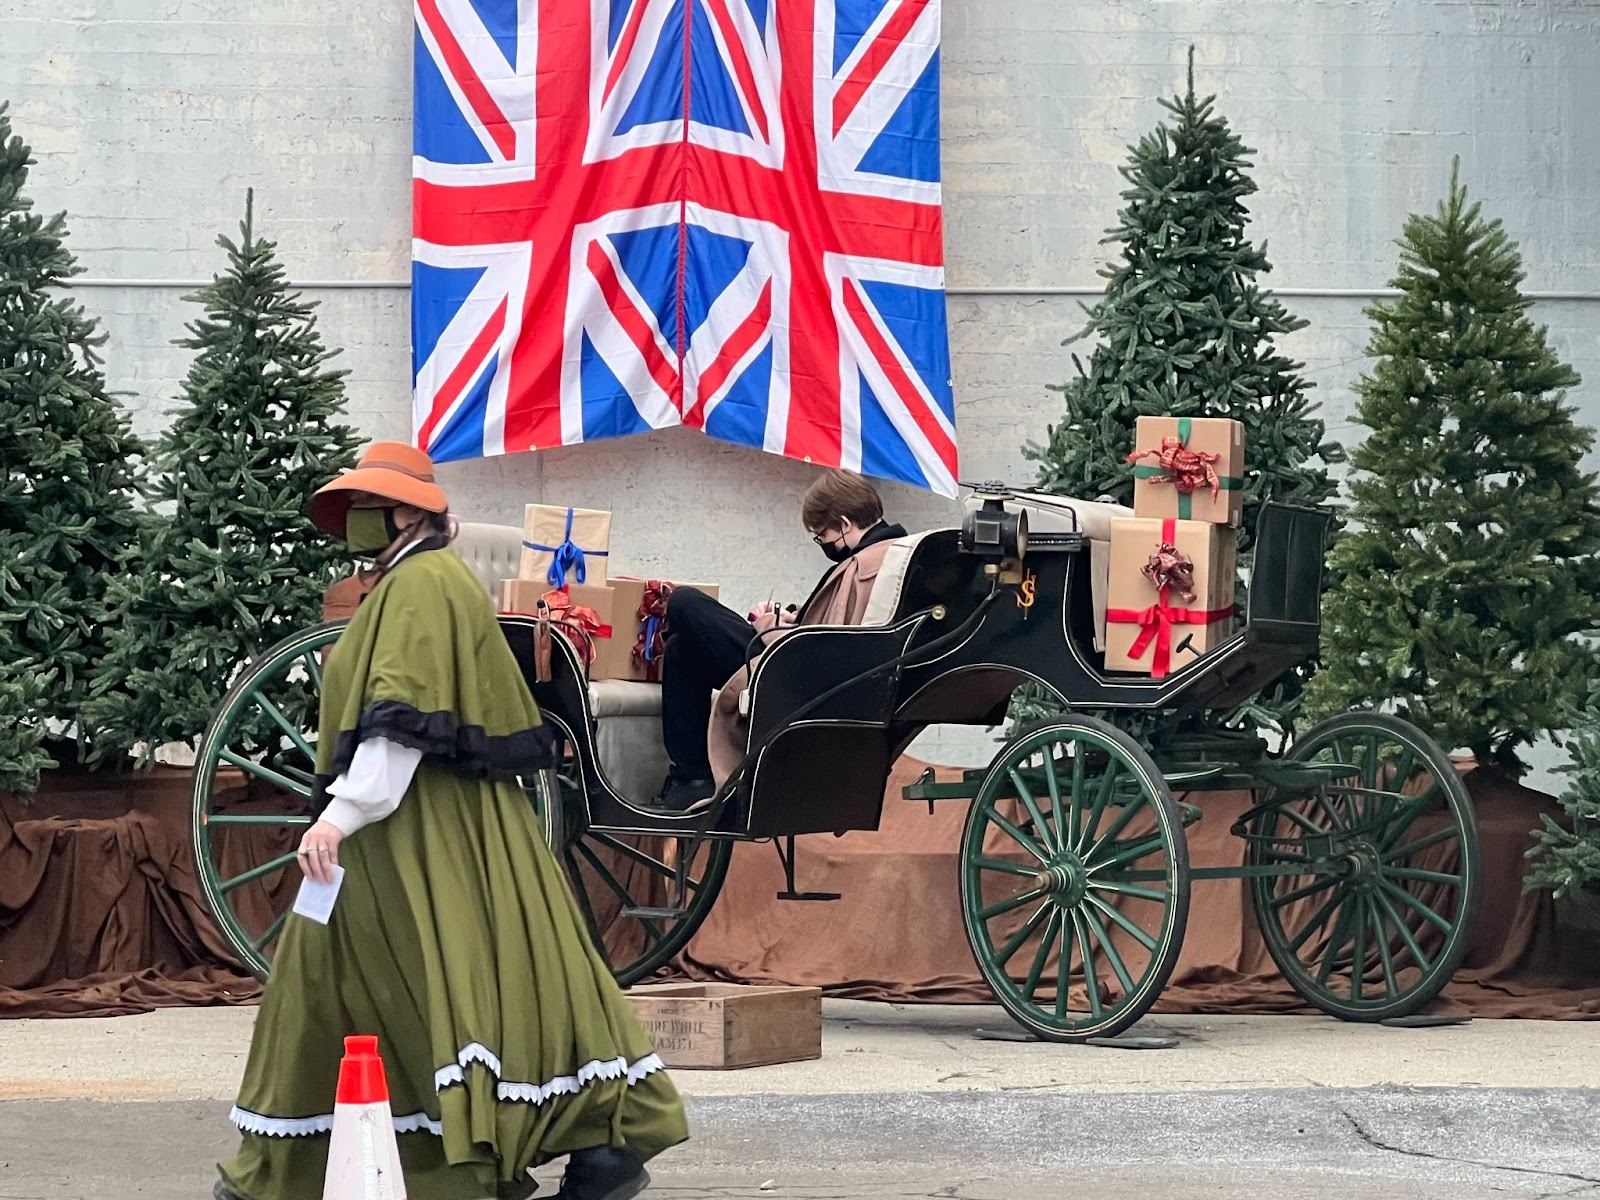 A woman dressed in 19th century British clothing walks in the foreground while a British flag, a carriage, and Christmas trees line the background.